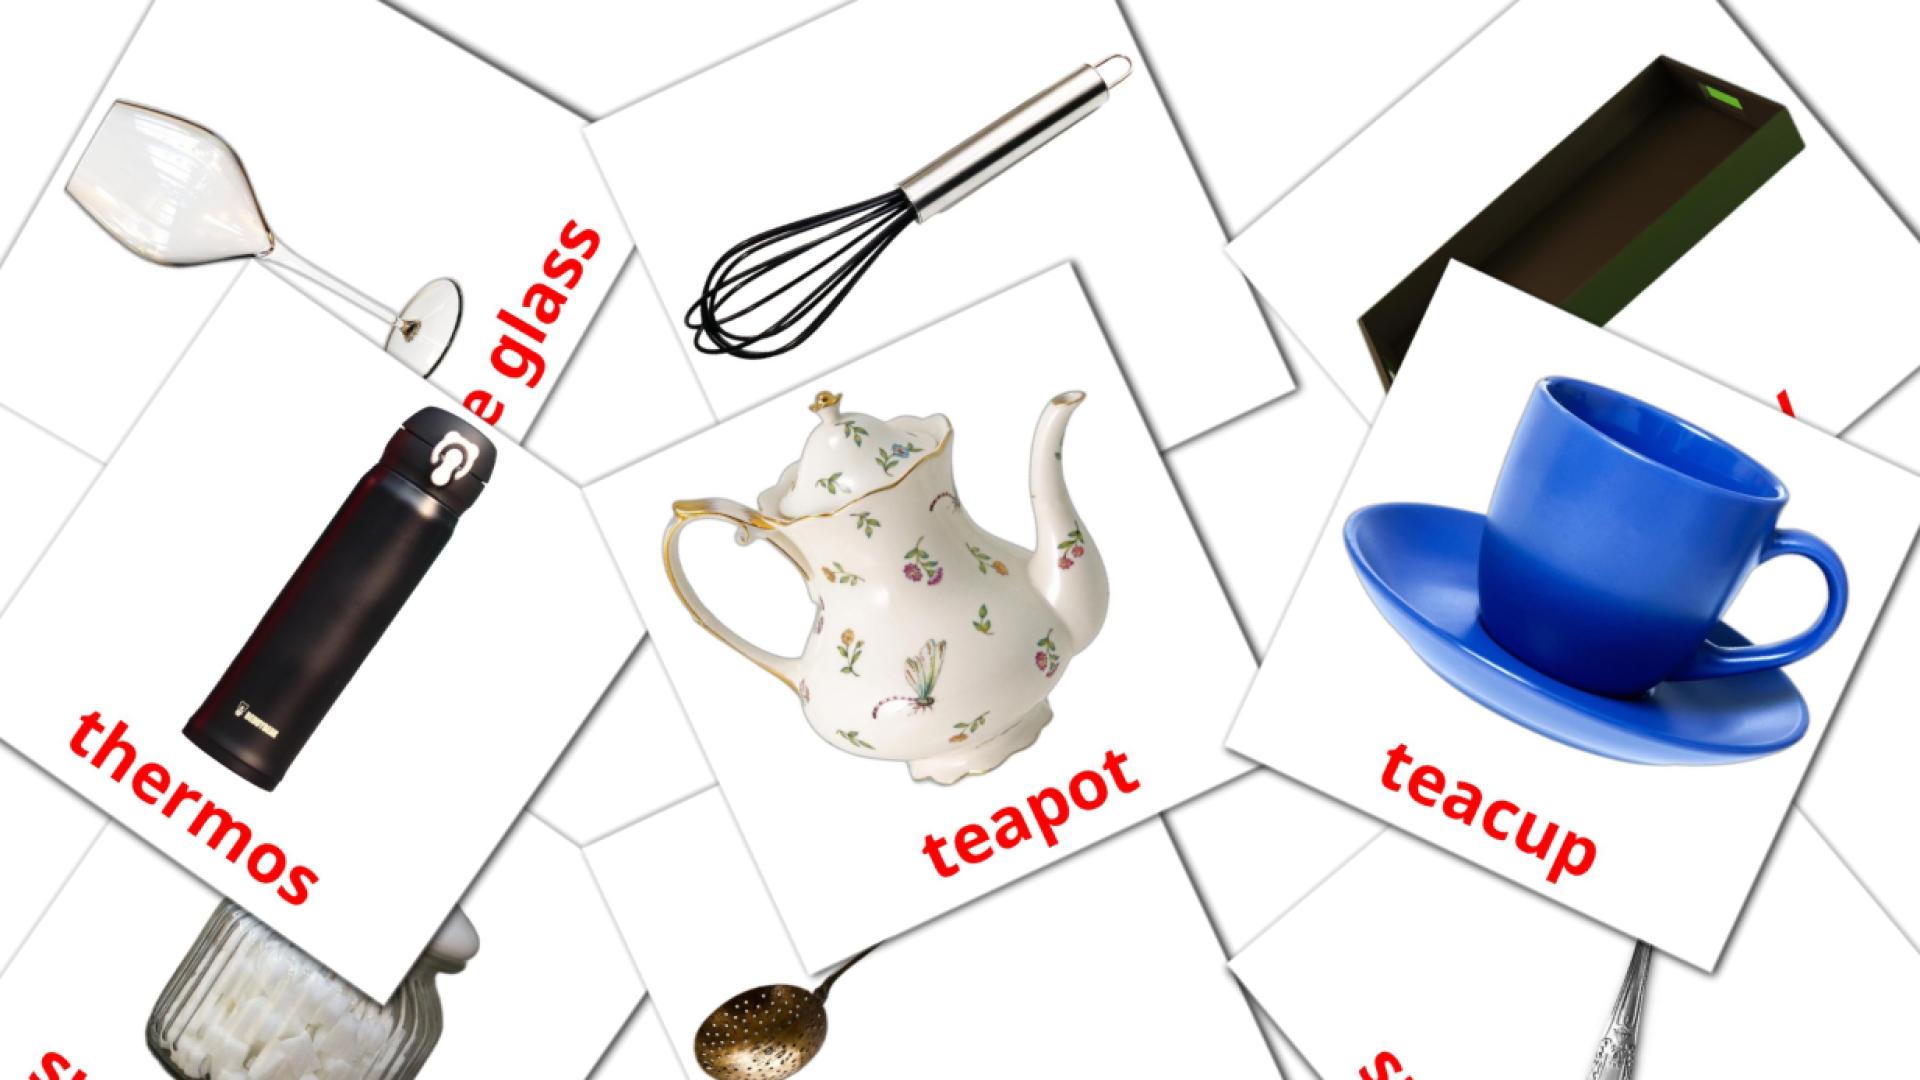 Kitchen chinese(Traditional) vocabulary flashcards